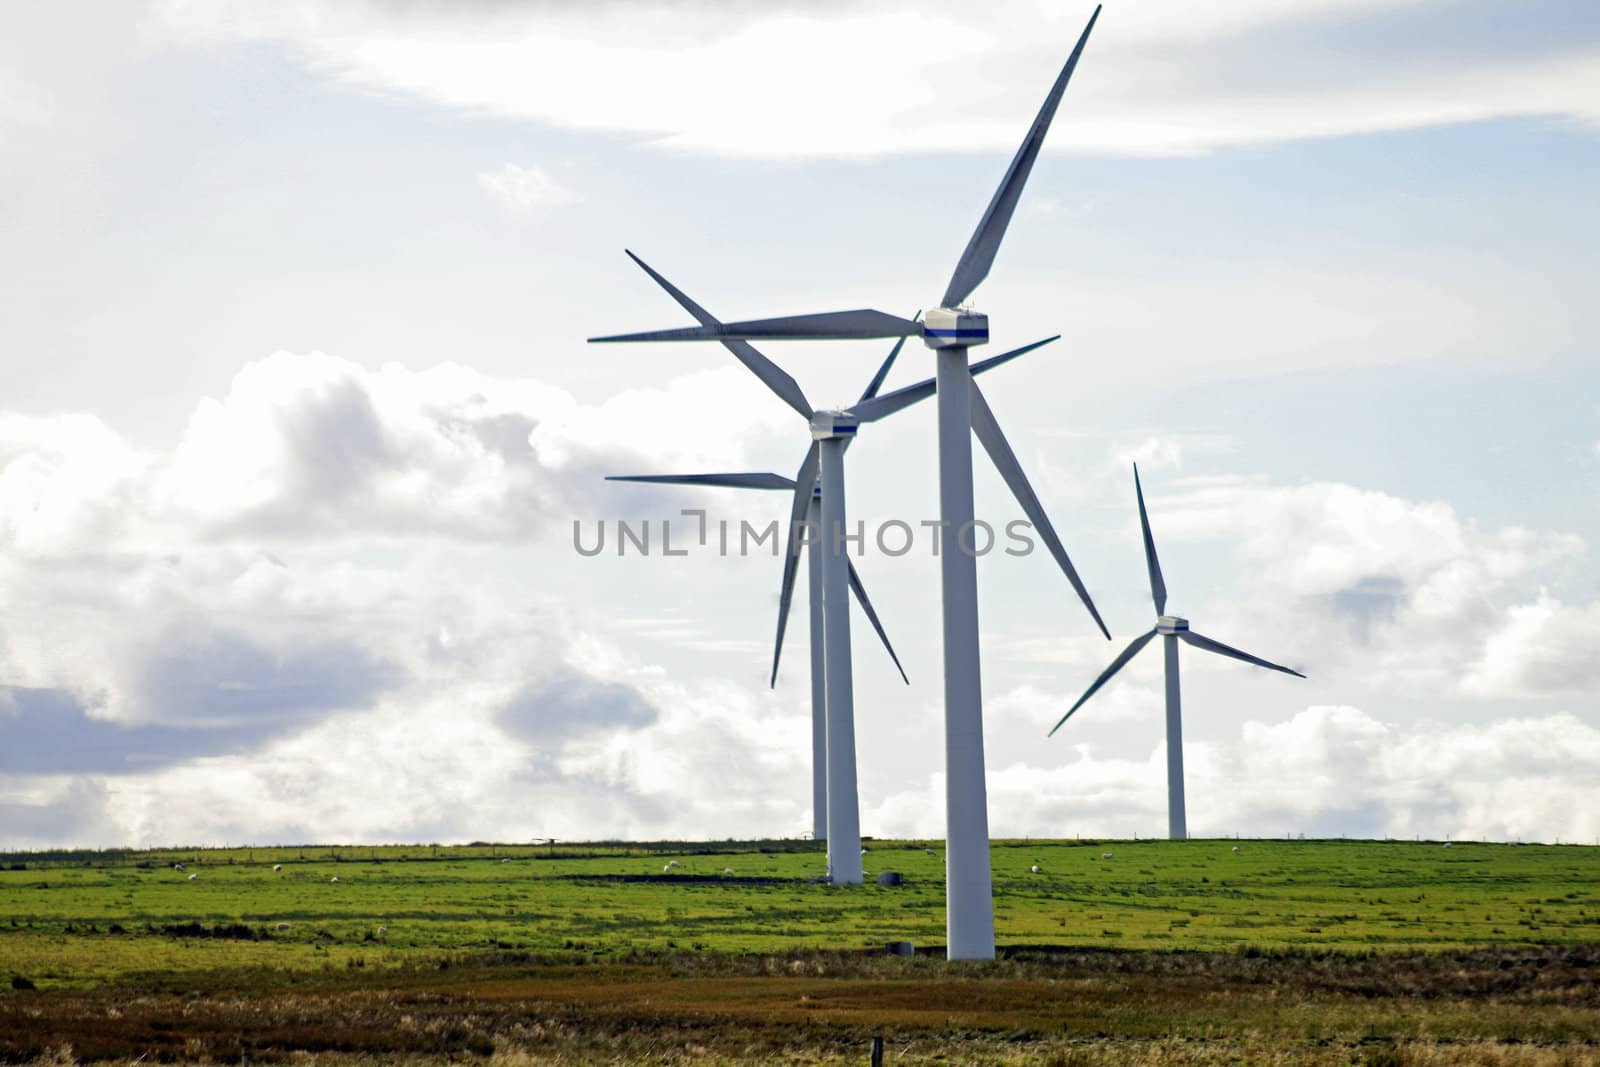 Typical windmill in a field creating aeolian energy